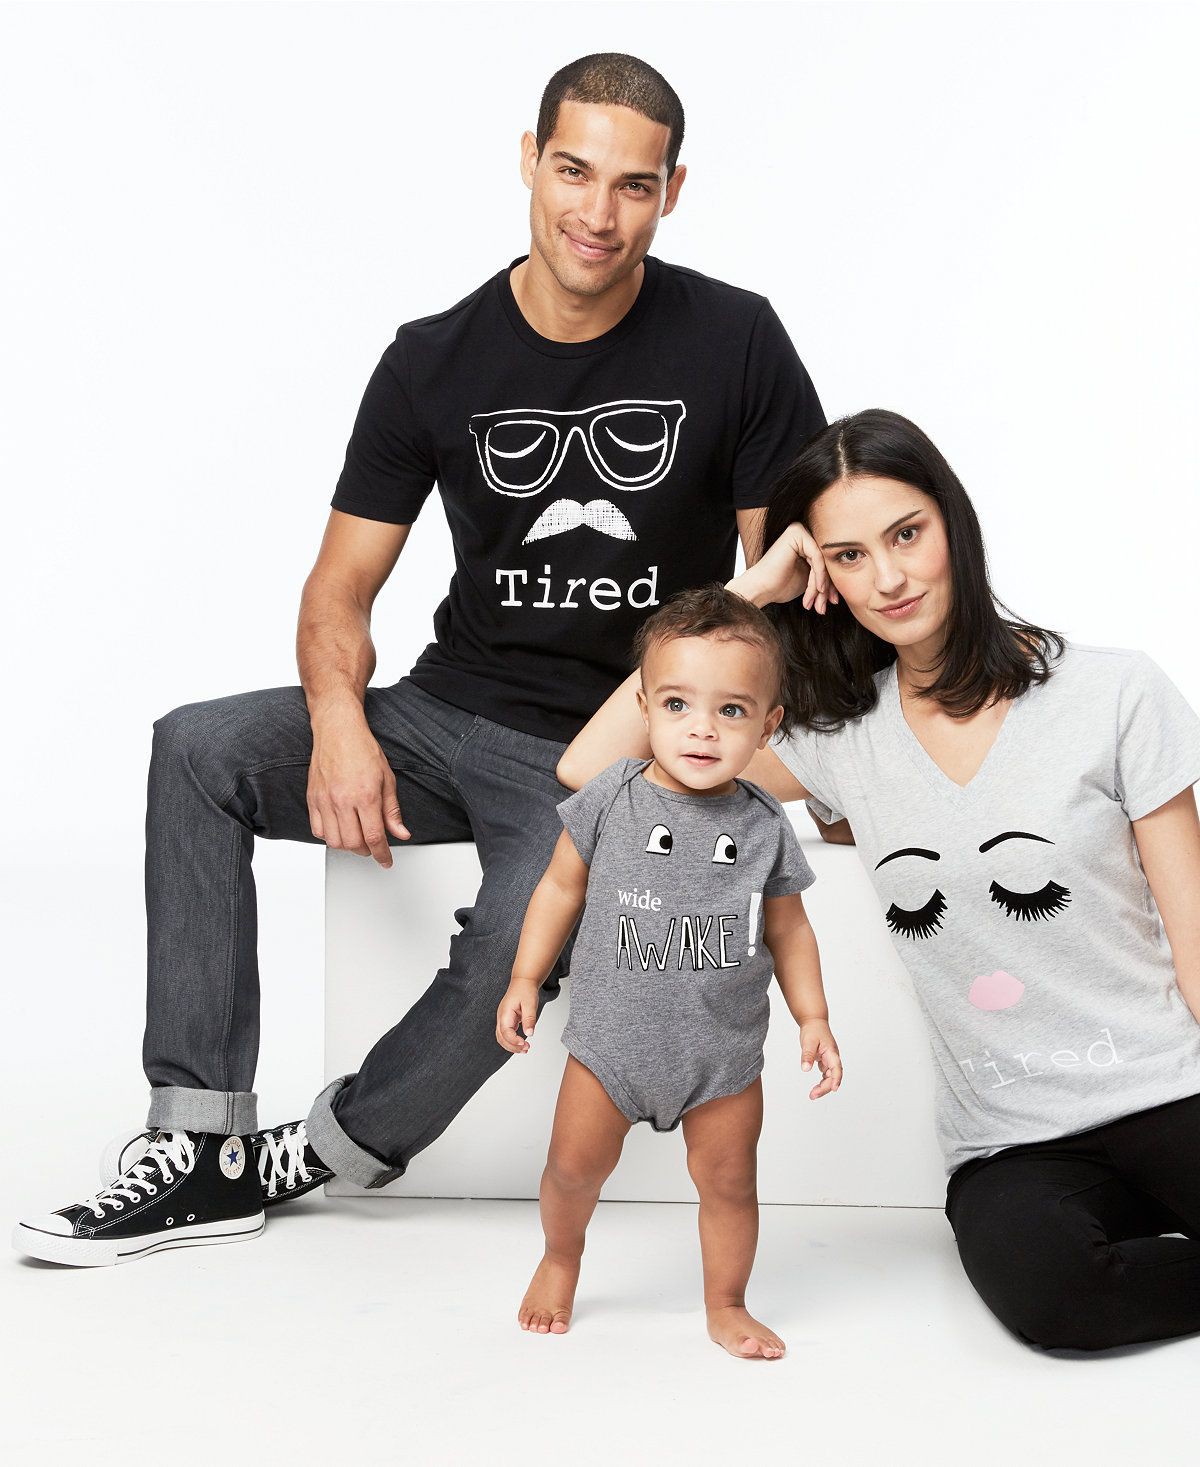 New Dad New Mom 2019 T-Shirts Father Mother Couple Tee Shirts